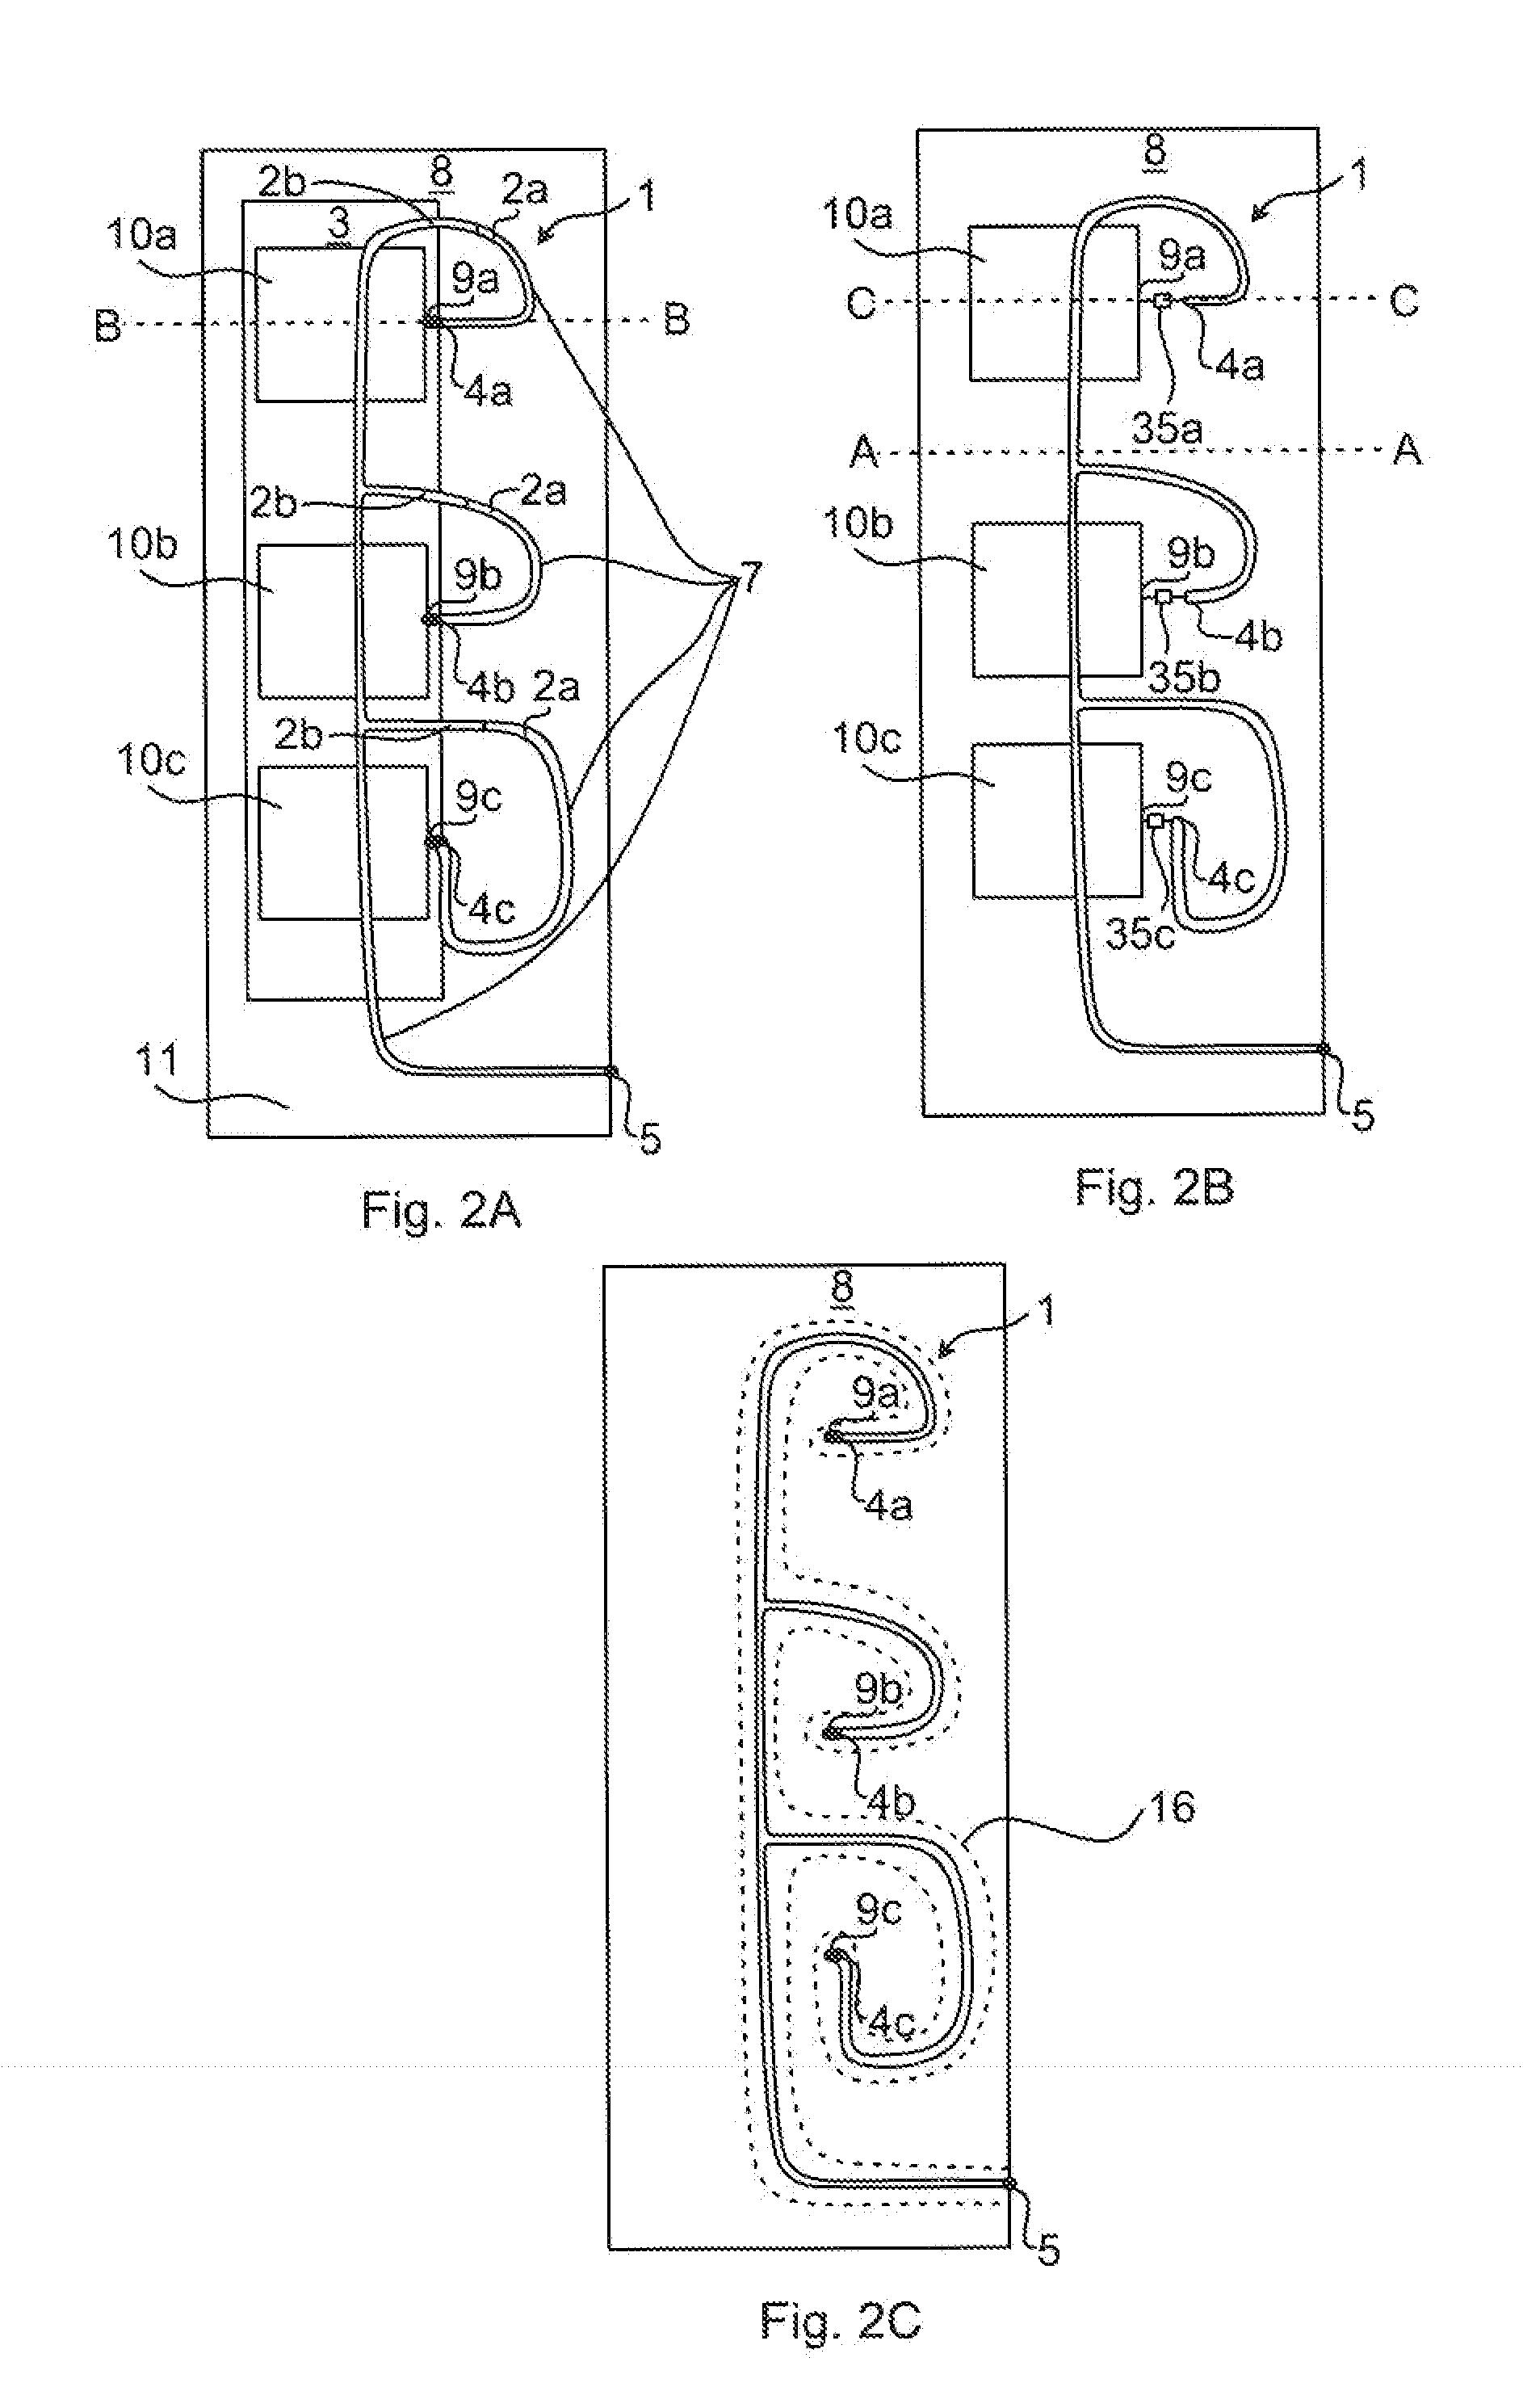 Power amplifier assembly comprising suspended strip lines